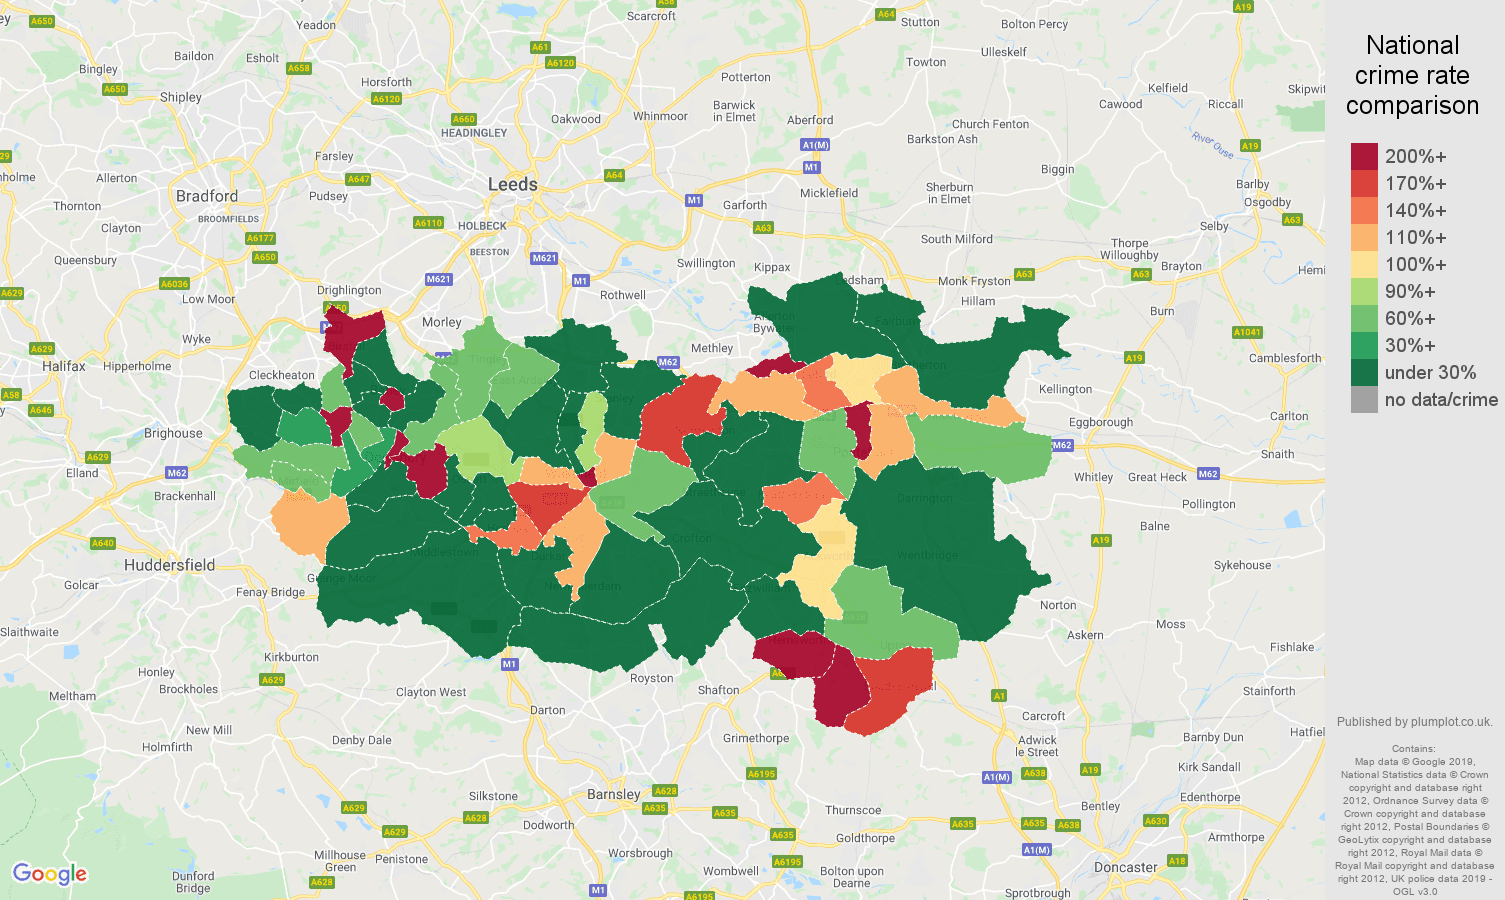 Wakefield shoplifting crime rate comparison map